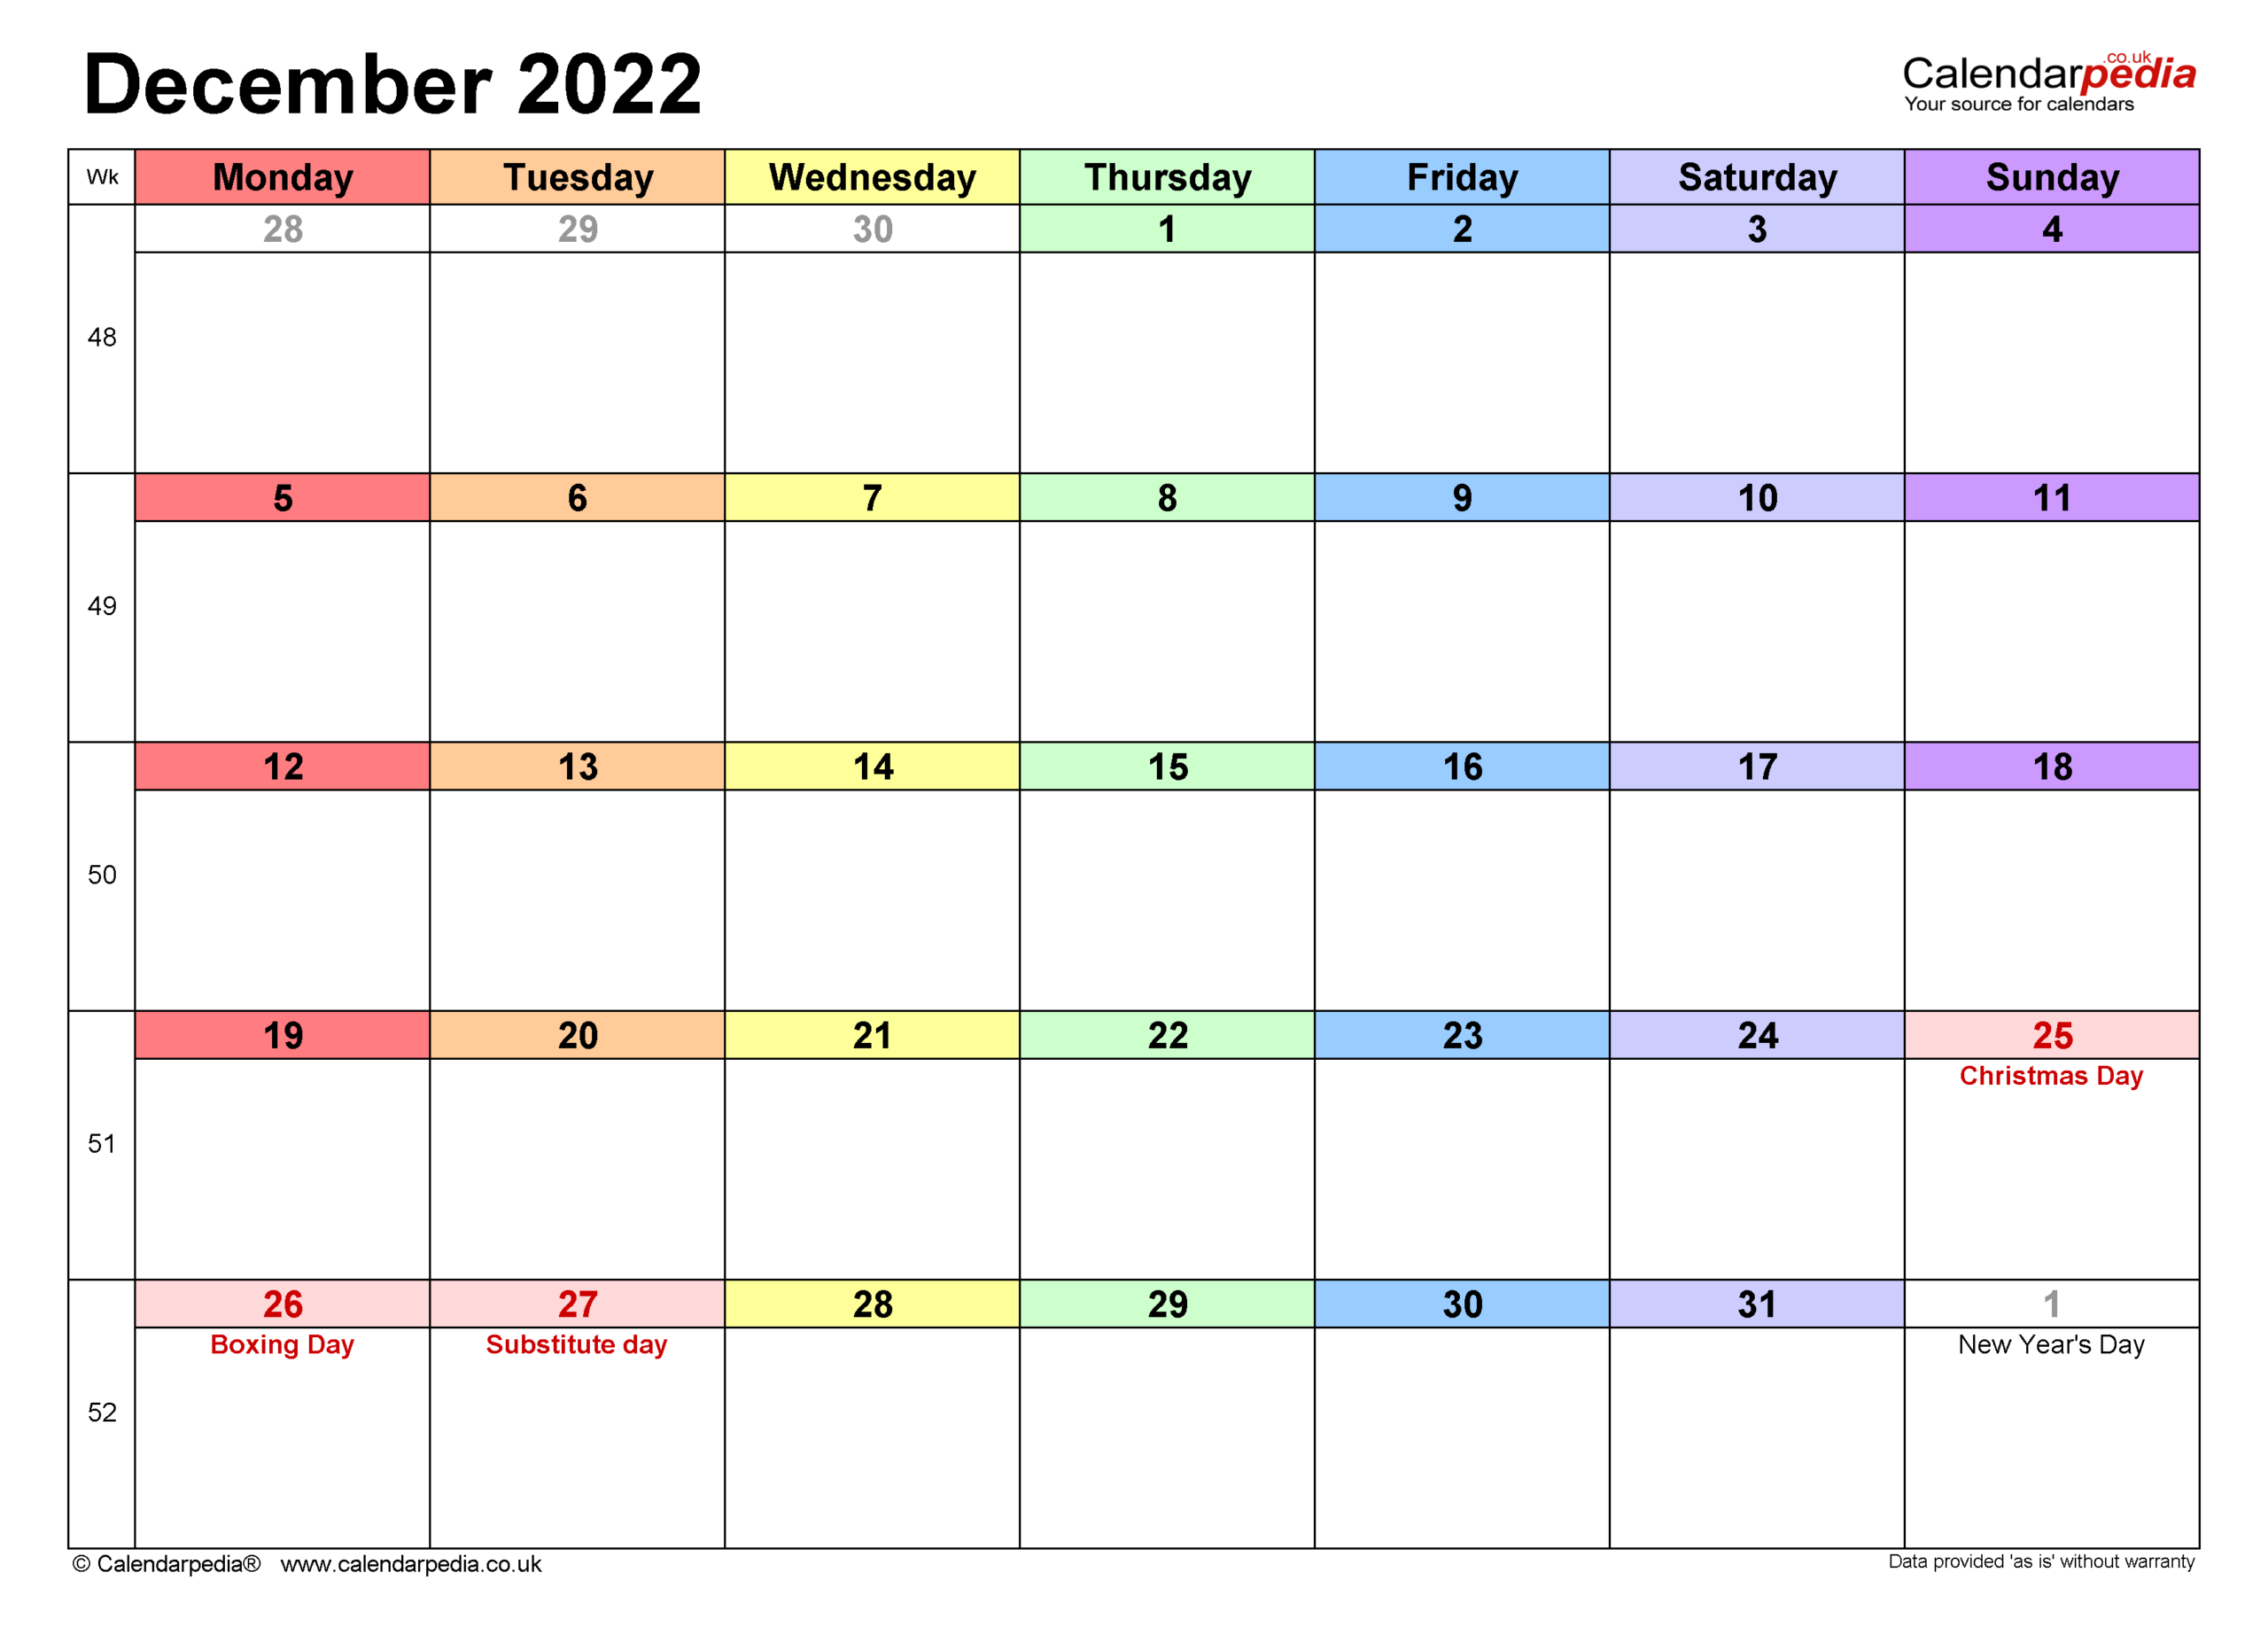 Calendar December 2022 Uk With Excel, Word And Pdf Templates-2022 Calendar With Holidays Uk